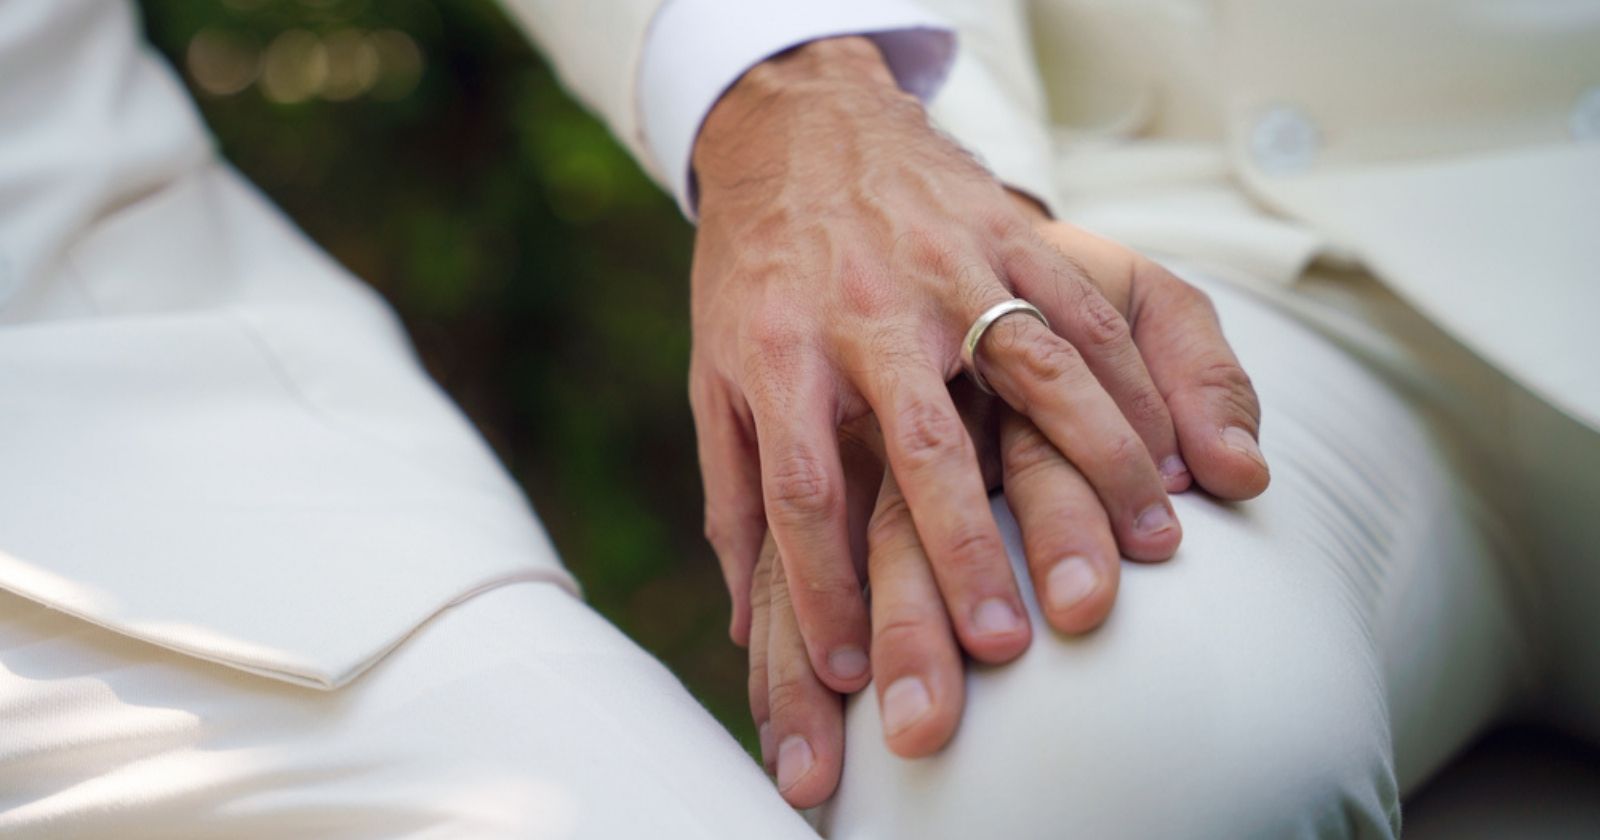 Switzerland celebrates its first same-sex marriages